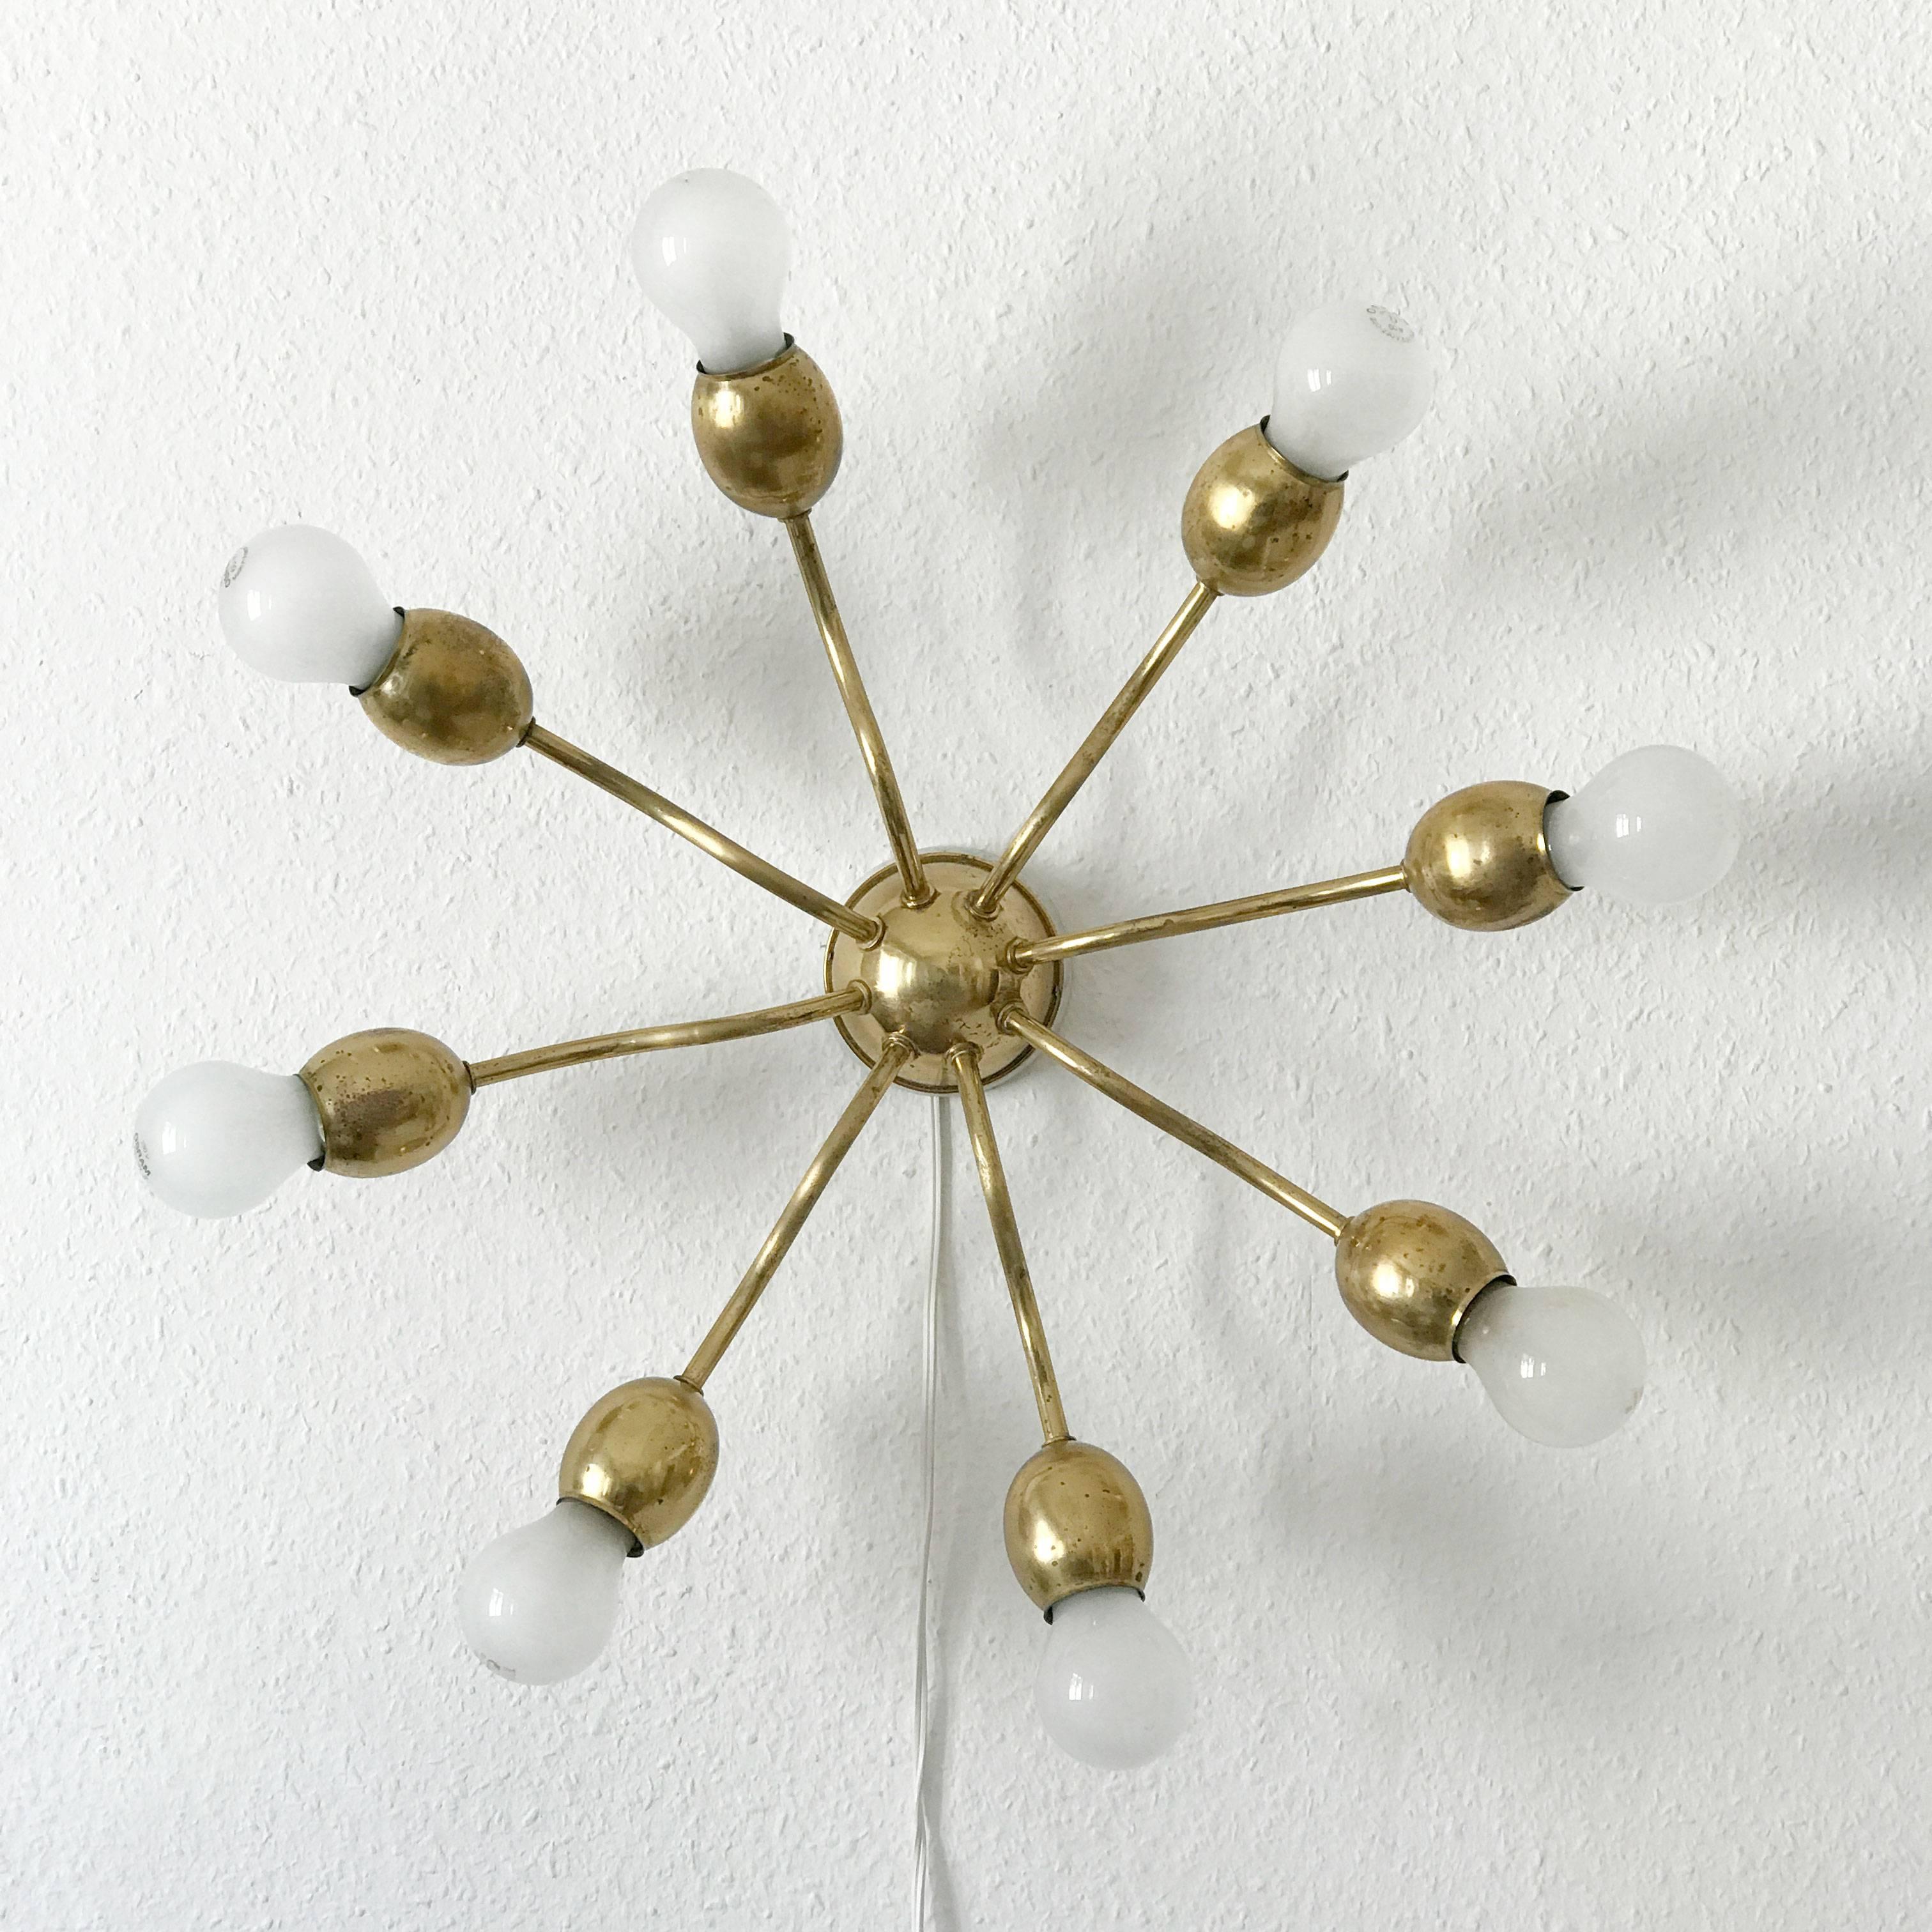 Elegant Mid-Century Modern Sputnik flush mount ceiling lamp wall light with eight arms. Designed and manufactured by J. & L. Lobmeyr, Vienna, Austria in 1950s. Bulb holders shaped like buds.
Executed completely in brass. The lamp needs eight E27